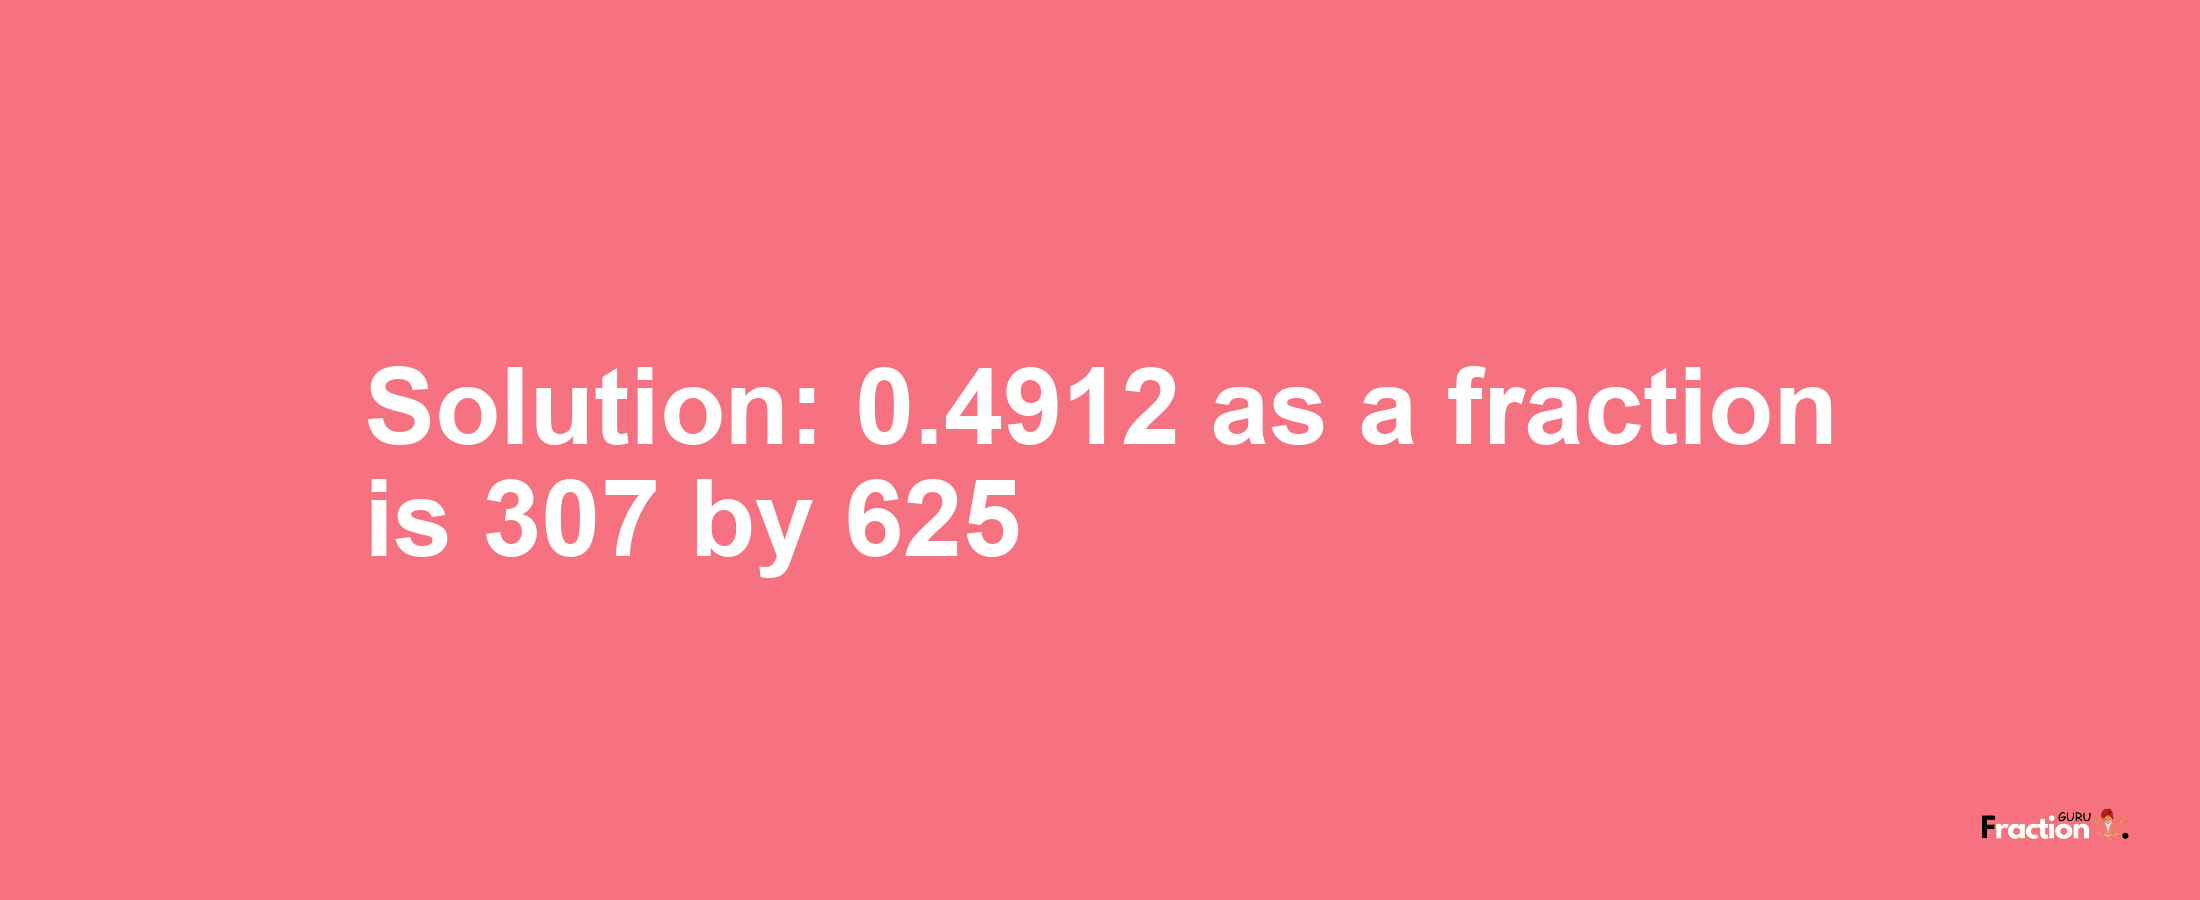 Solution:0.4912 as a fraction is 307/625